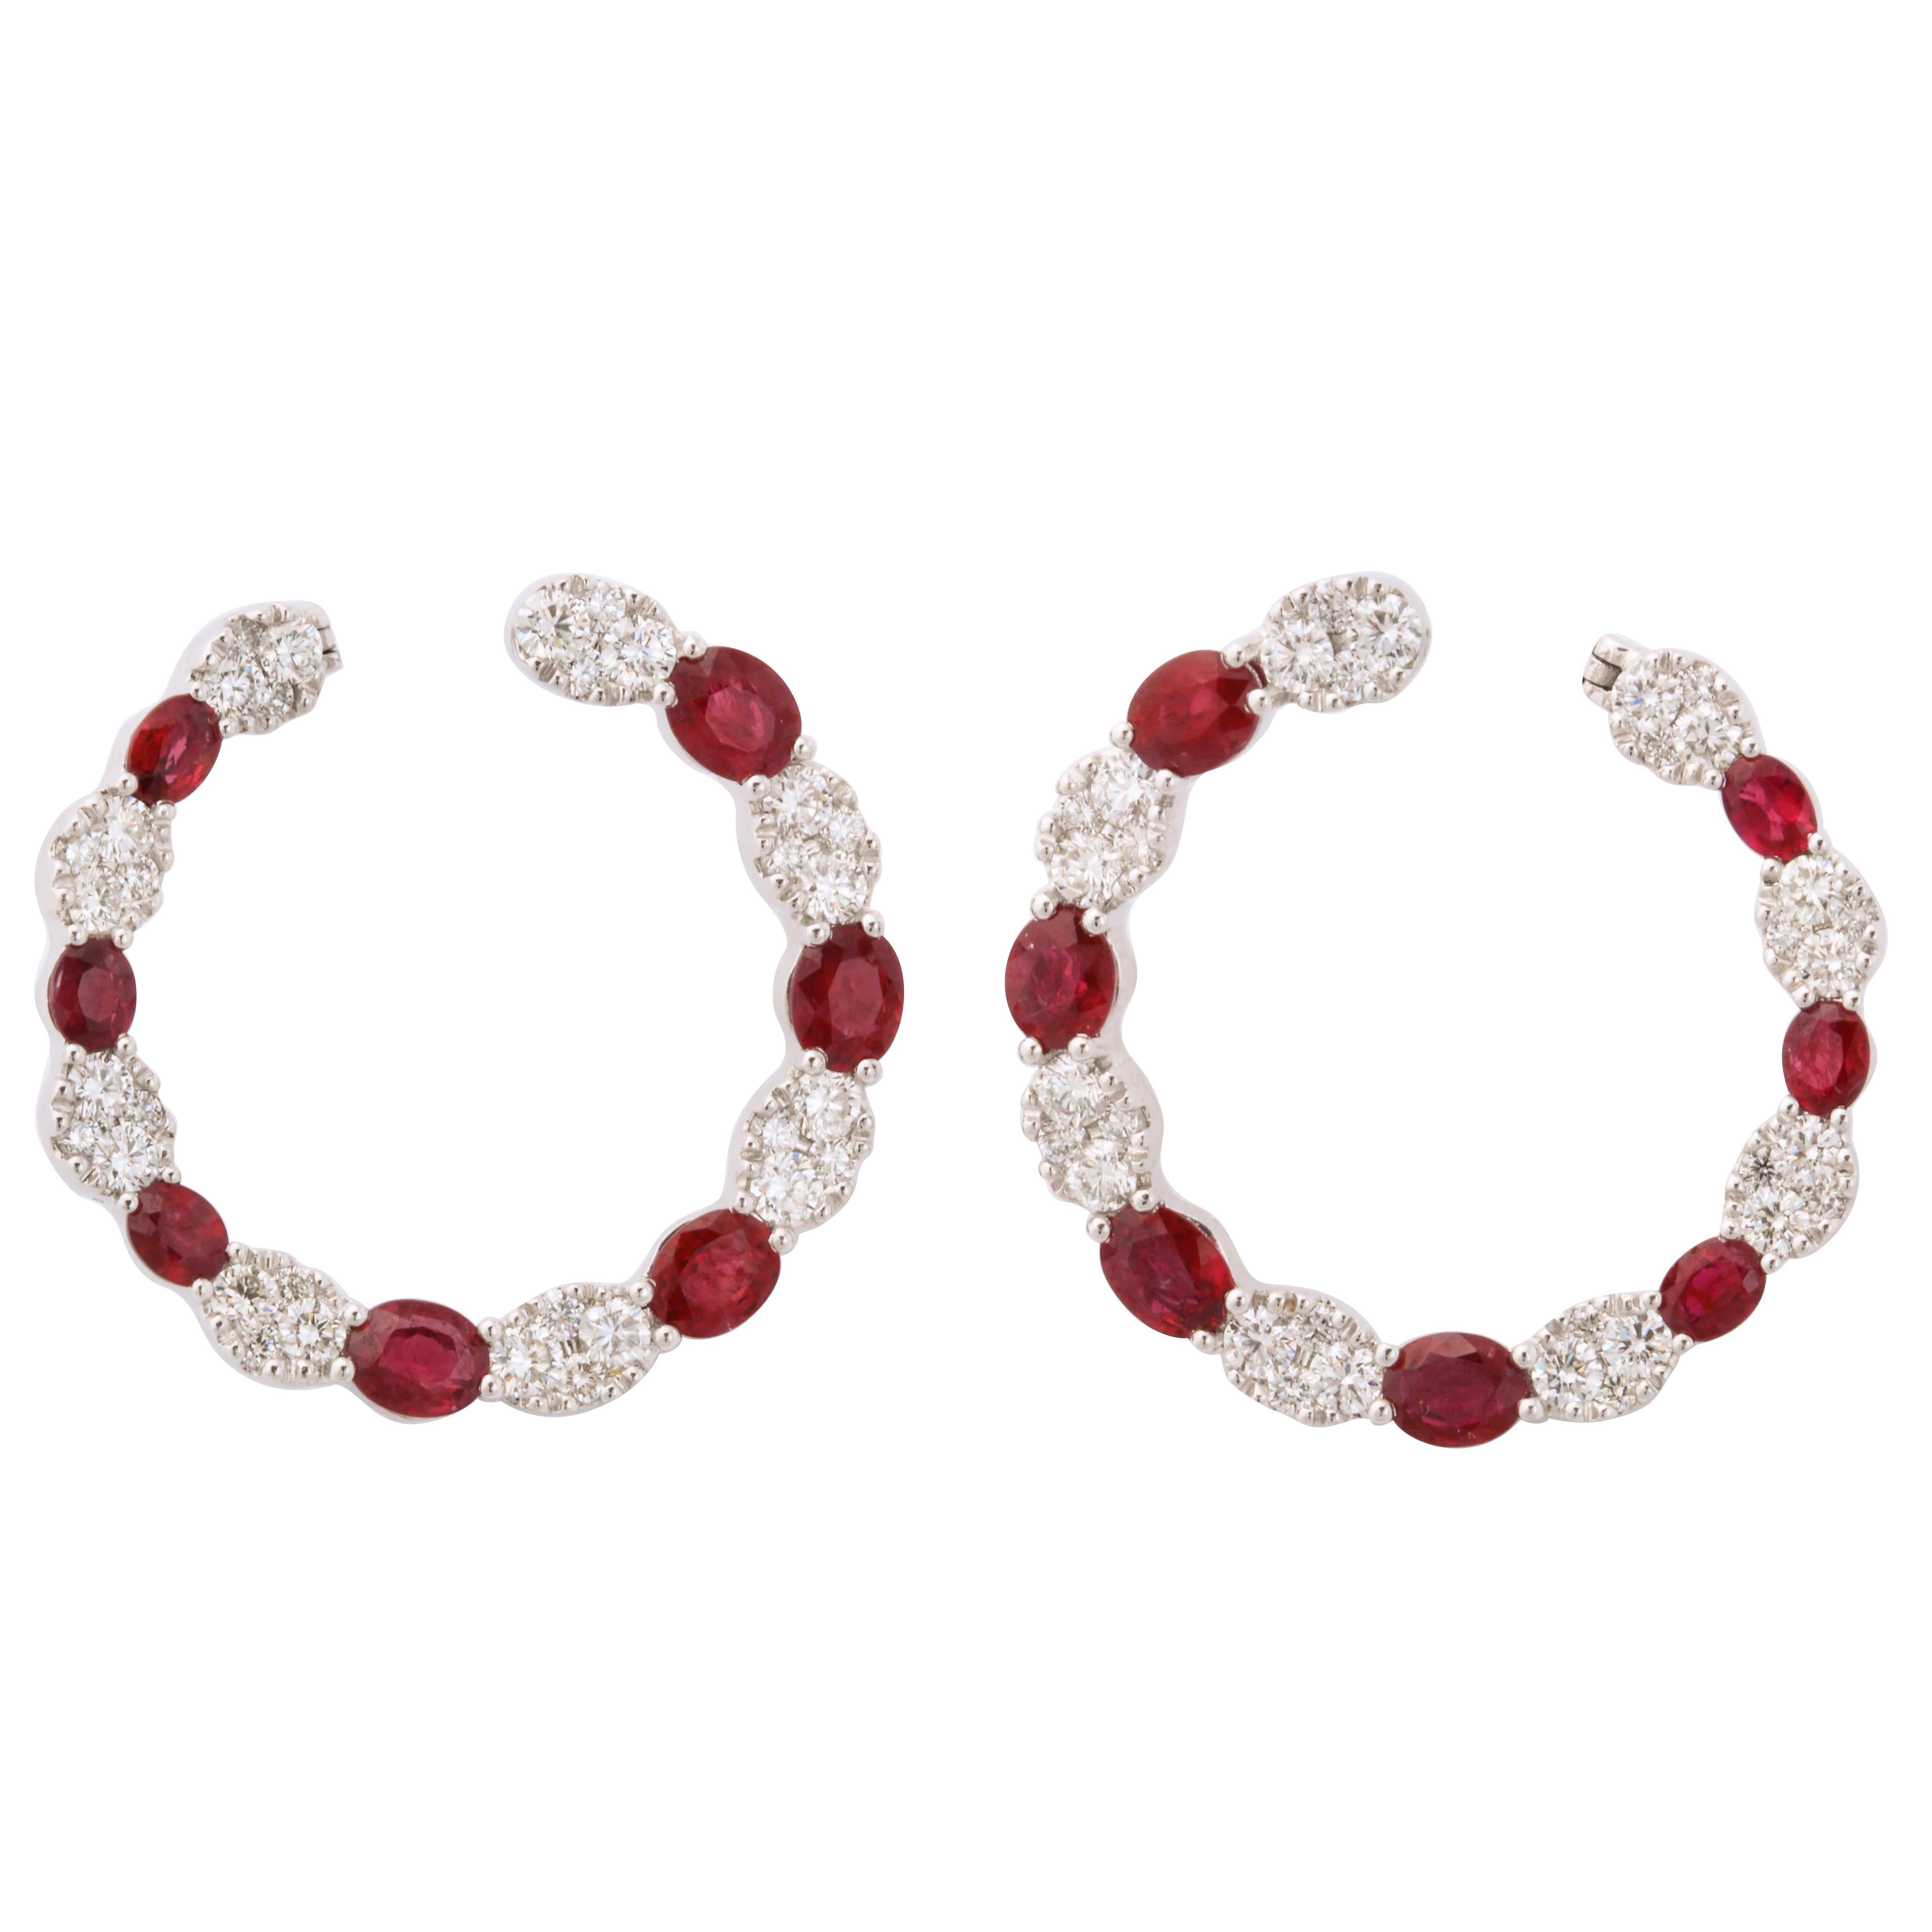 Bright red oval rubies (4.98cts) and round diamonds configured in an oval formation (2.54cts) alternate in this bold and dramatic hoop earring.  Easily wearable from day into evening these earrings will never fail to be noticed.  With a diameter of